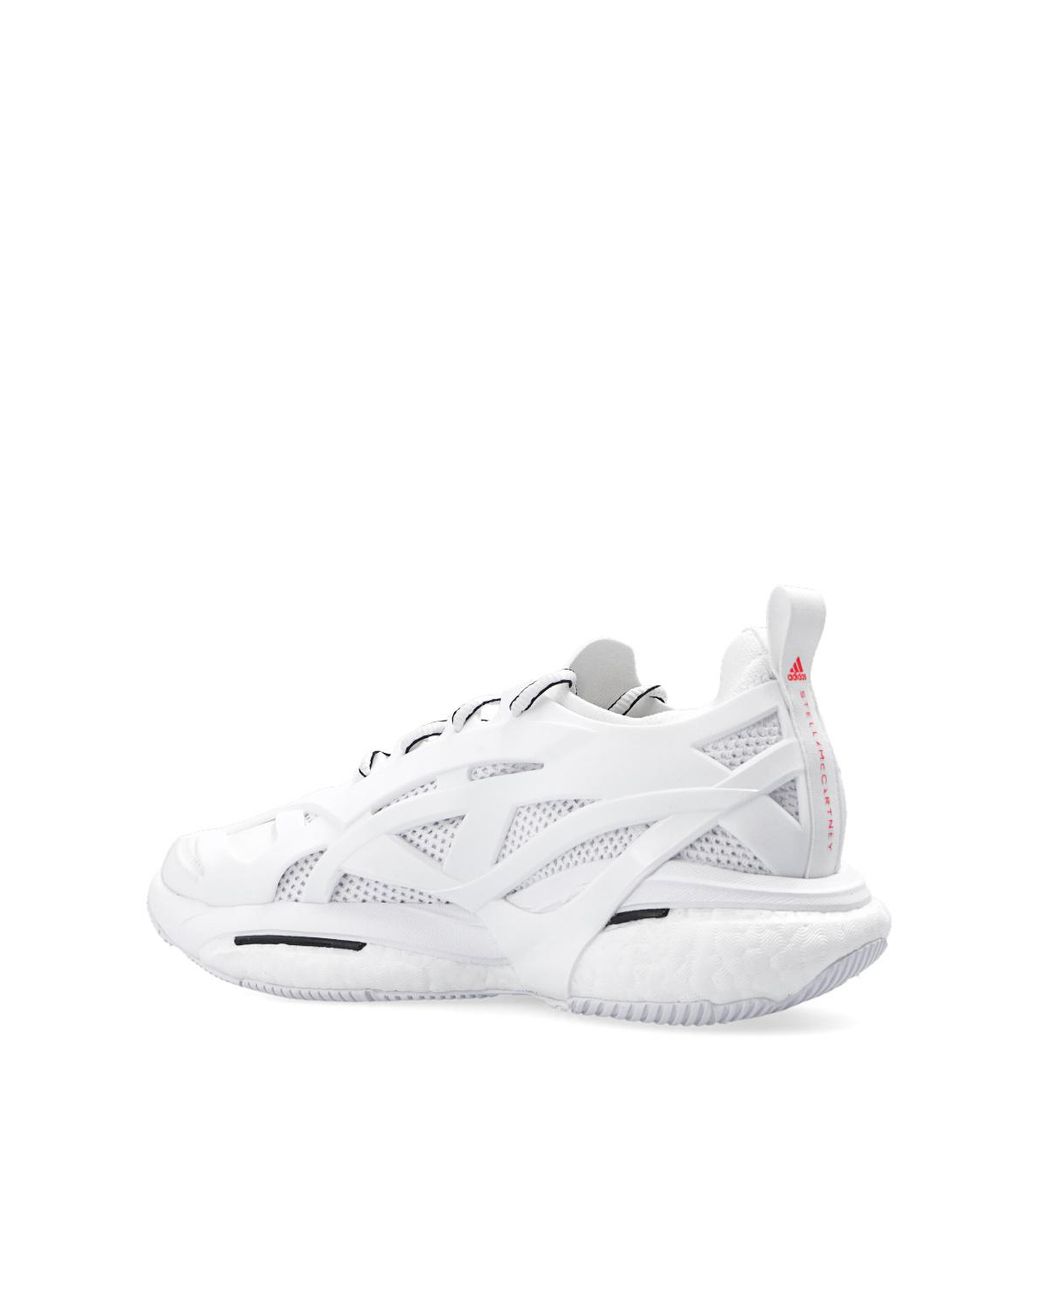 adidas By Stella McCartney Rubber 'solarglide' Running Shoes in White | Lyst